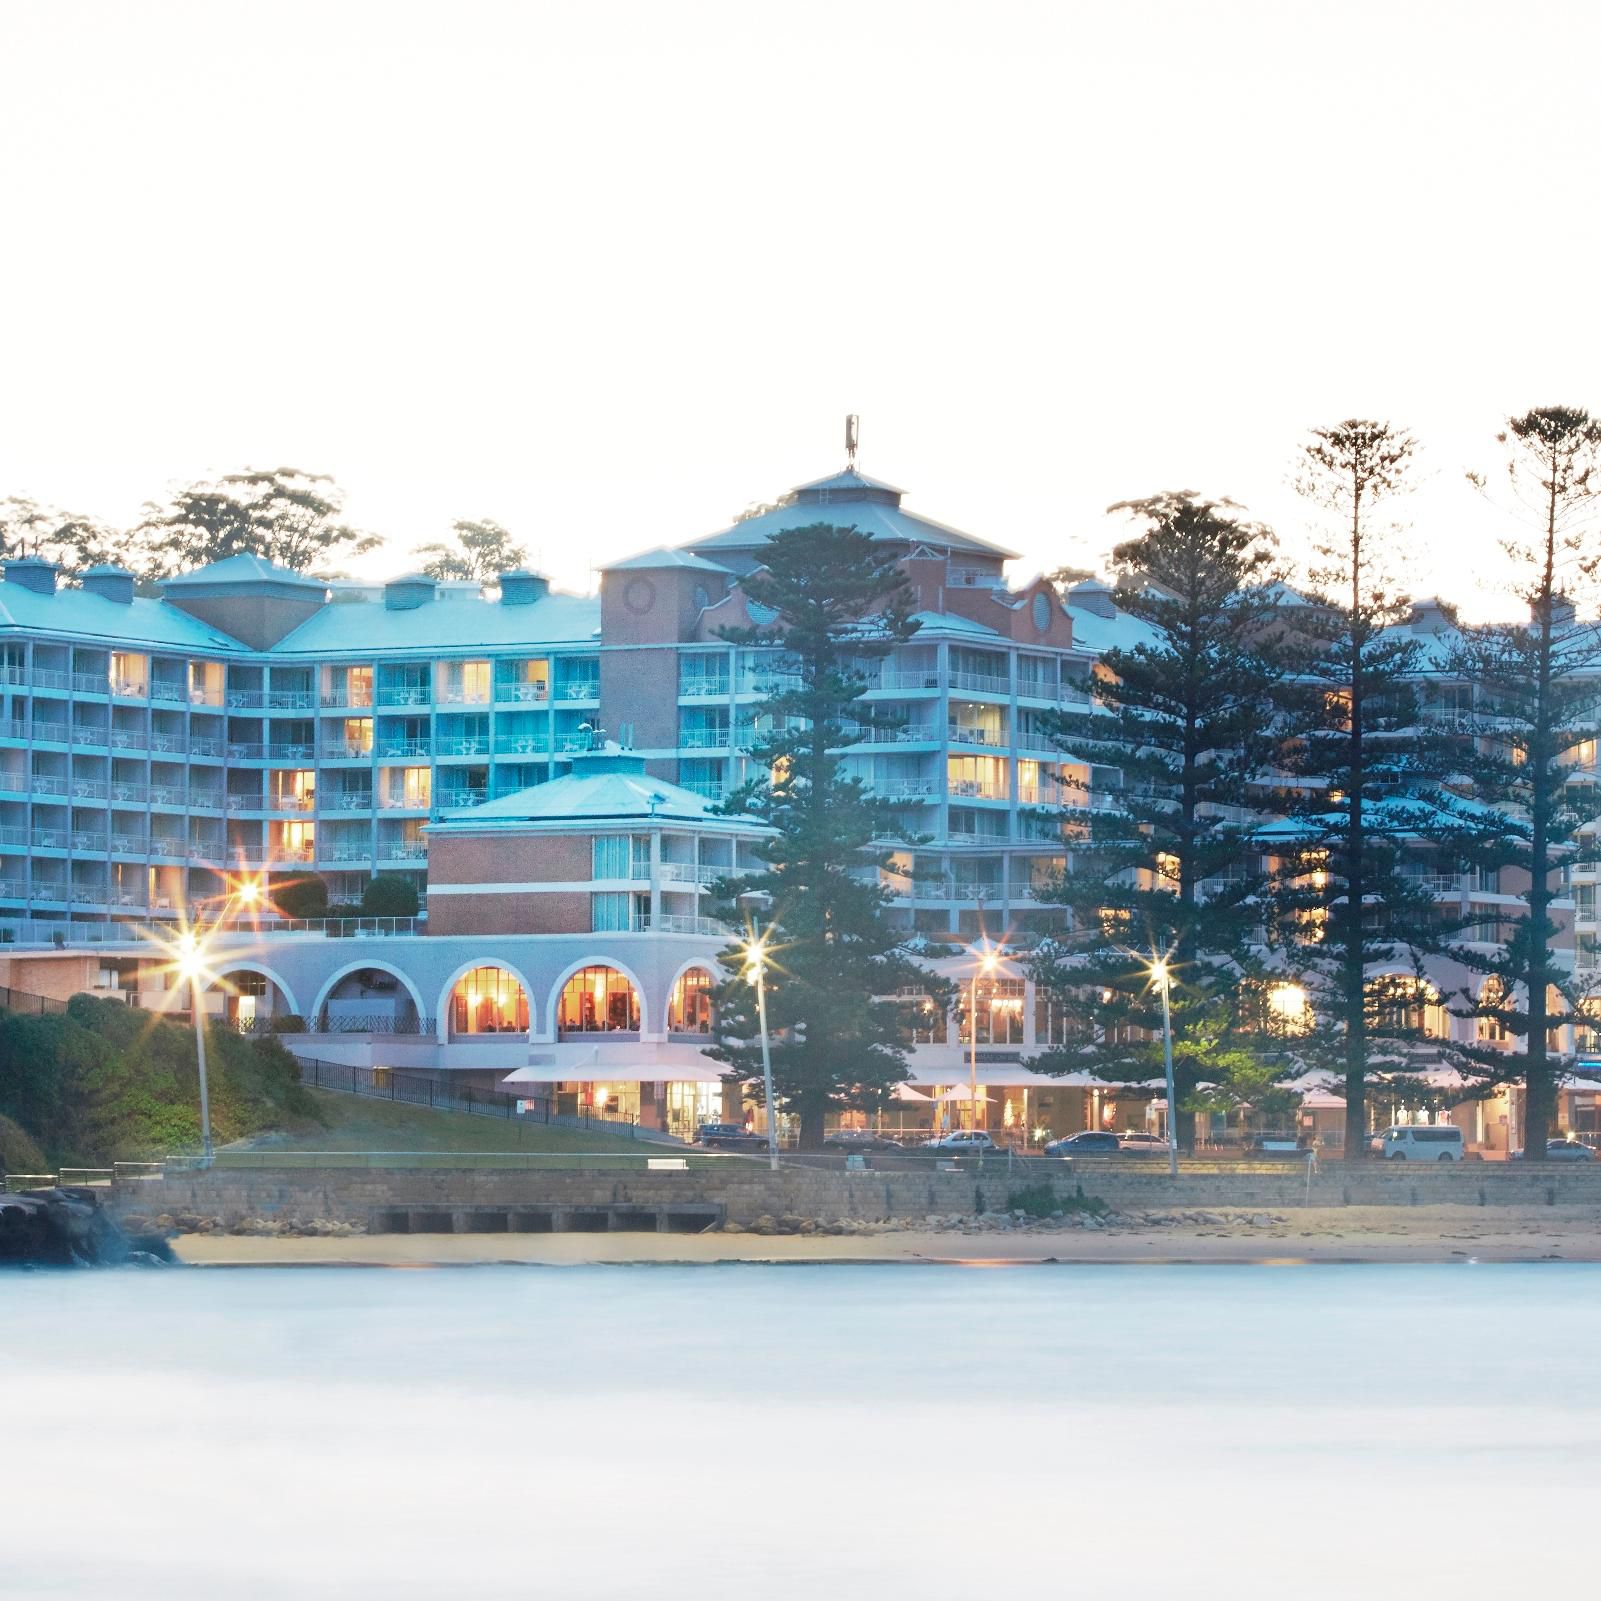 Our hotel is located directly opposite beautiful Terrigal Beach